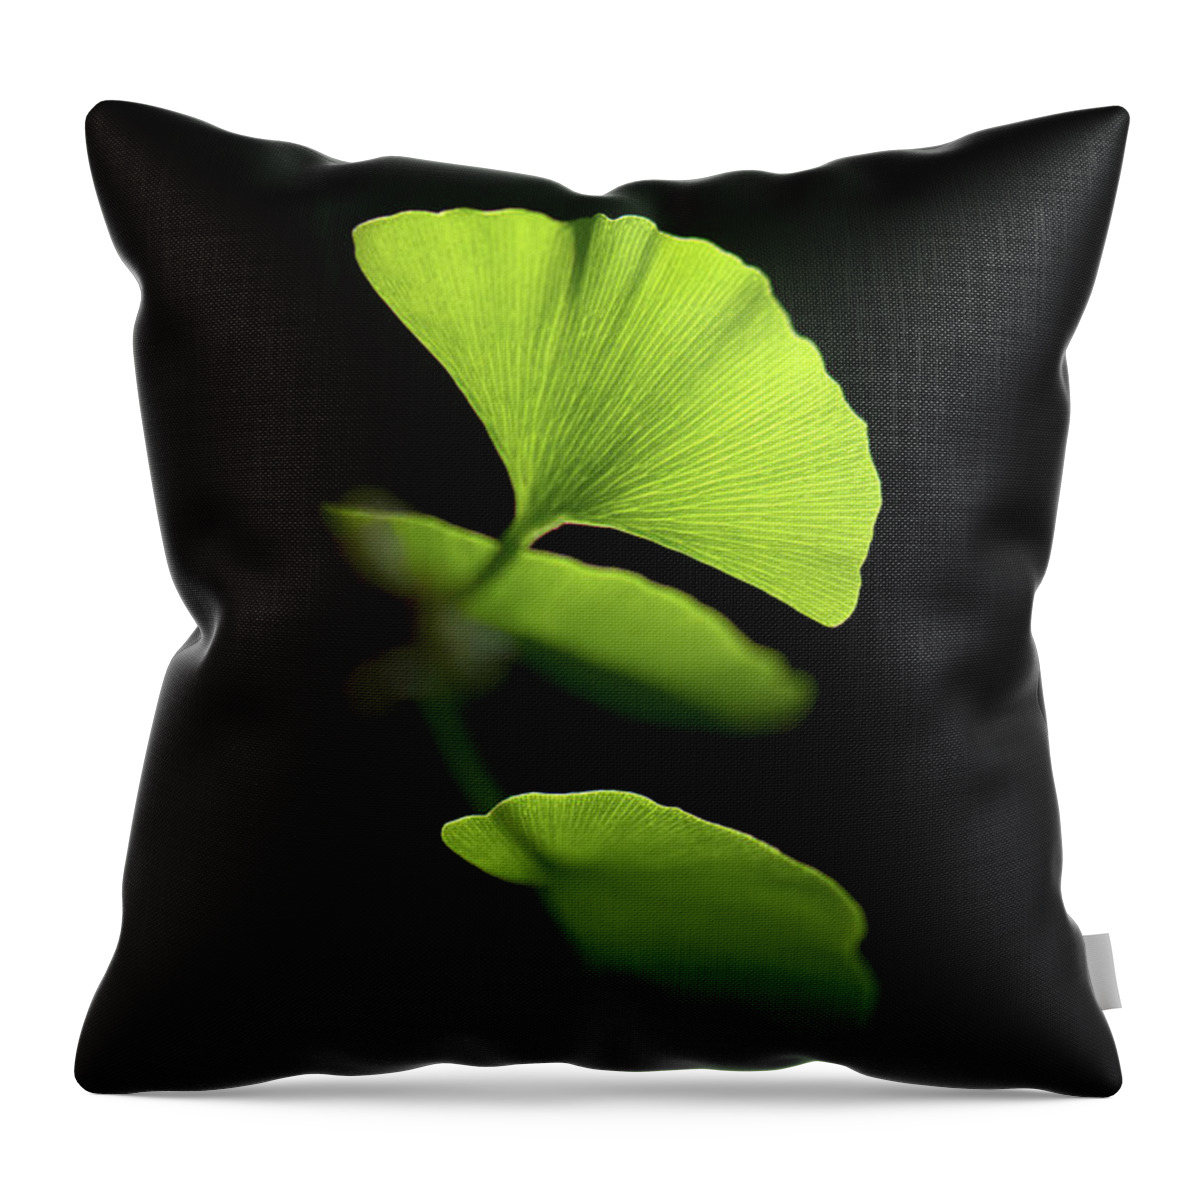 Leaves Throw Pillow featuring the photograph Green Sagacity by Philippe Sainte-Laudy